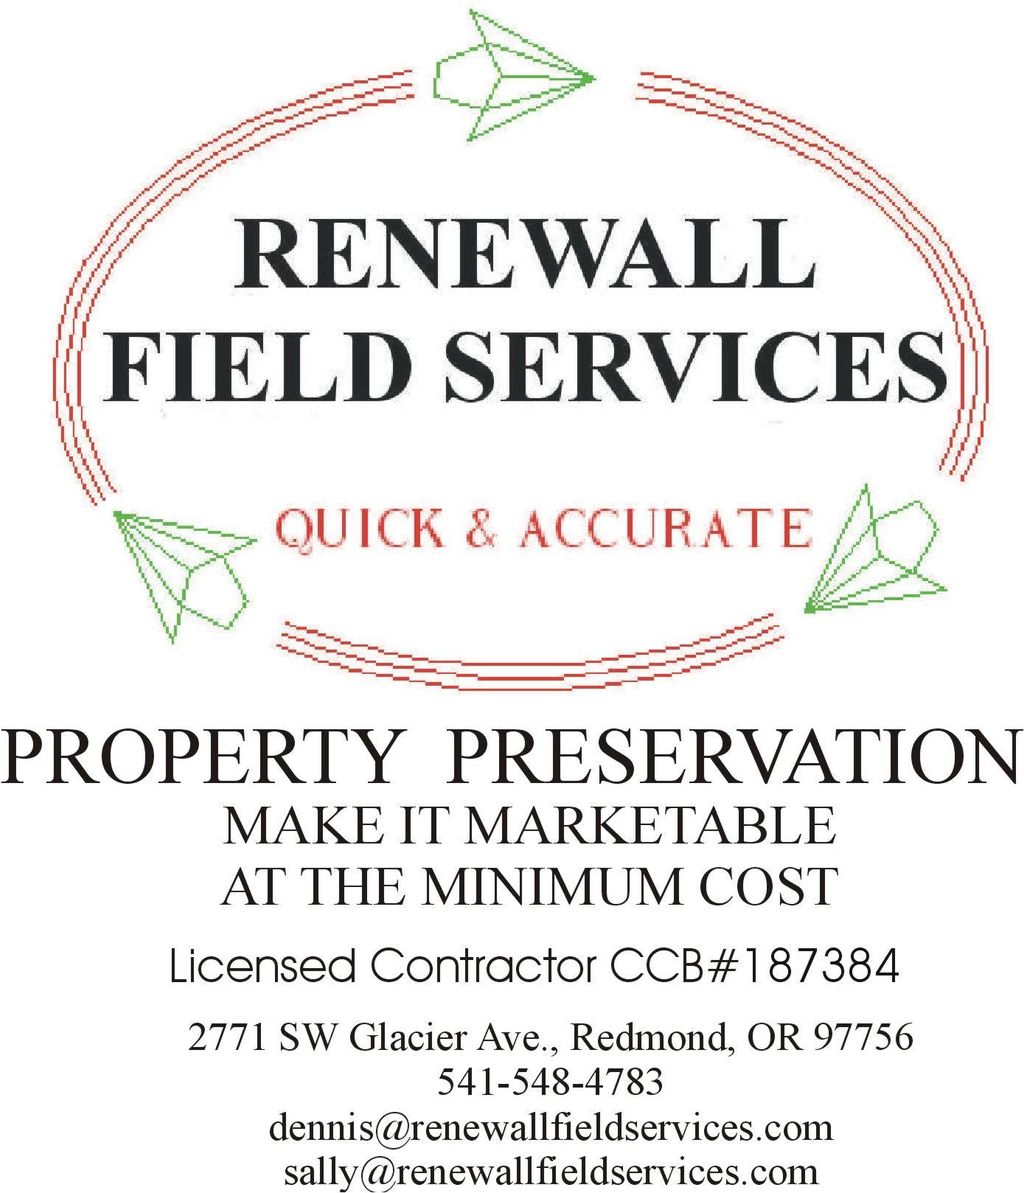 Renewall Field Services